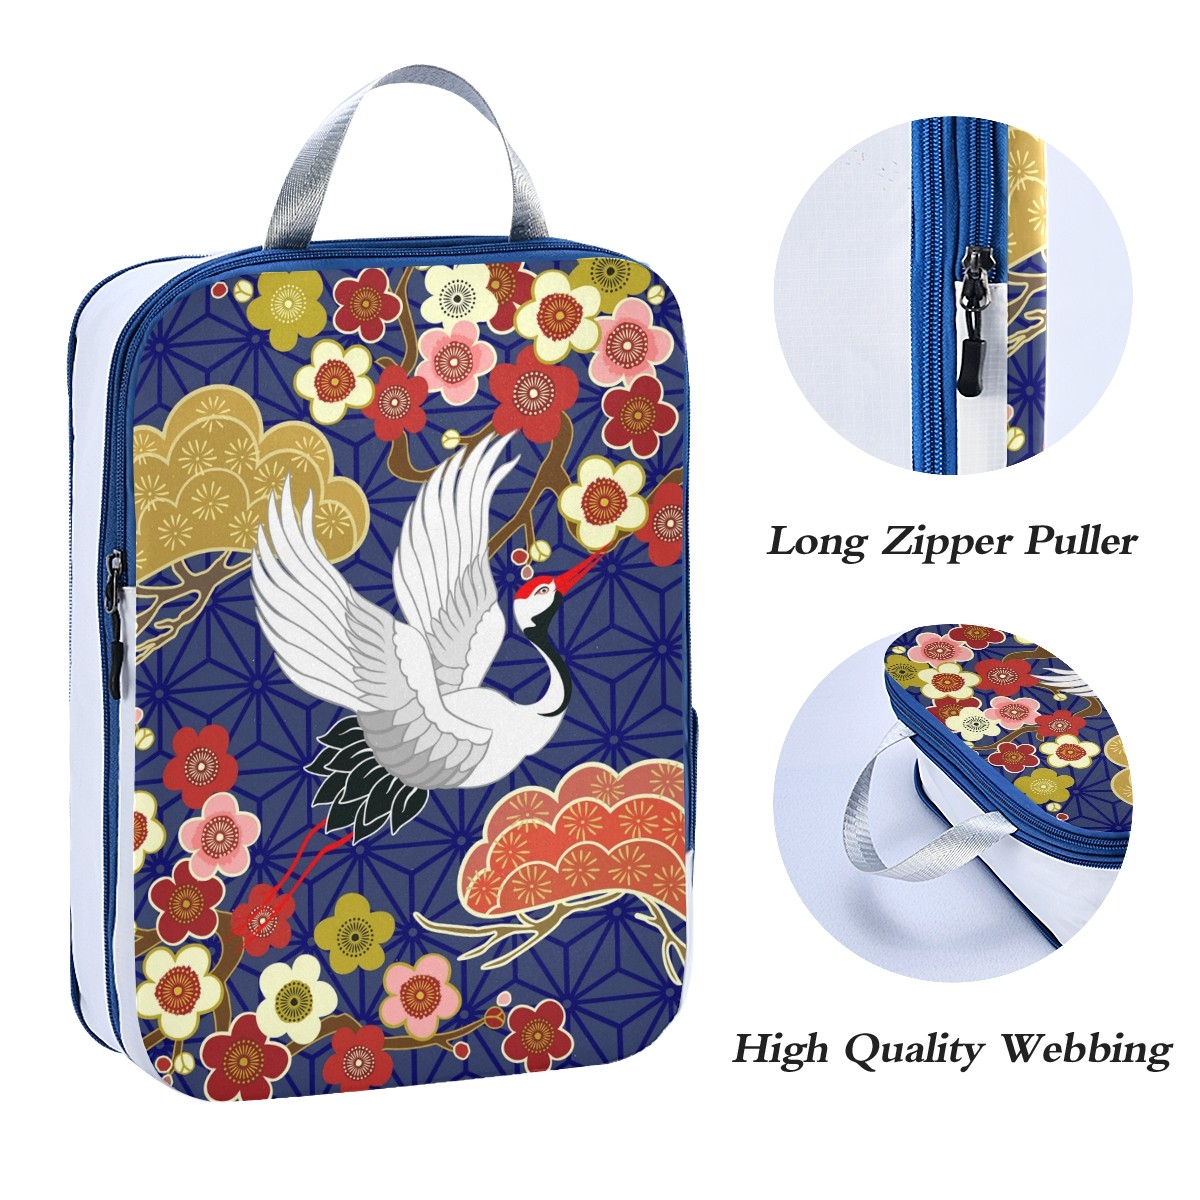 Organizer Bags 3 Pack Sets